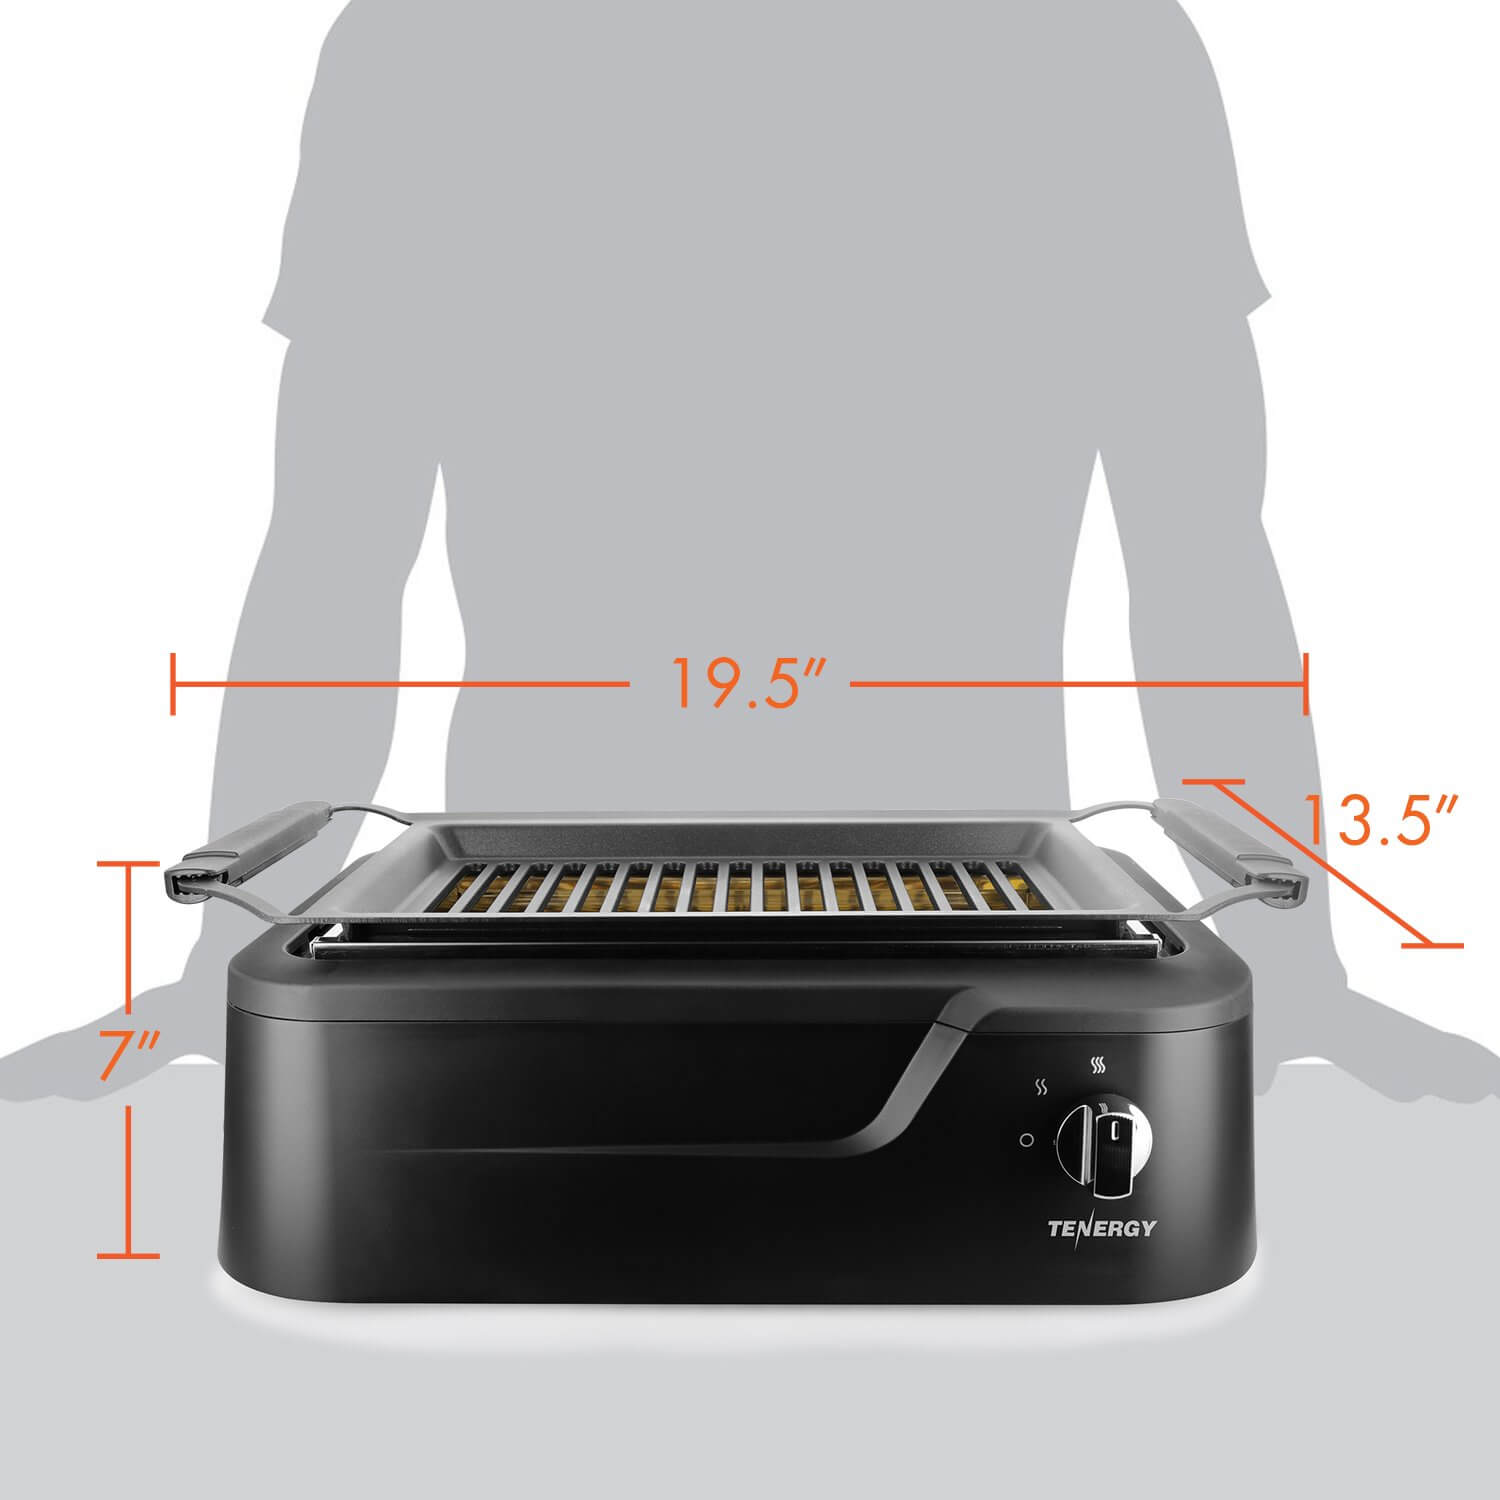 Tenergy Redigrill Smoke-Less Infrared Grill, countertop grill, electric grill indoor, electric grills